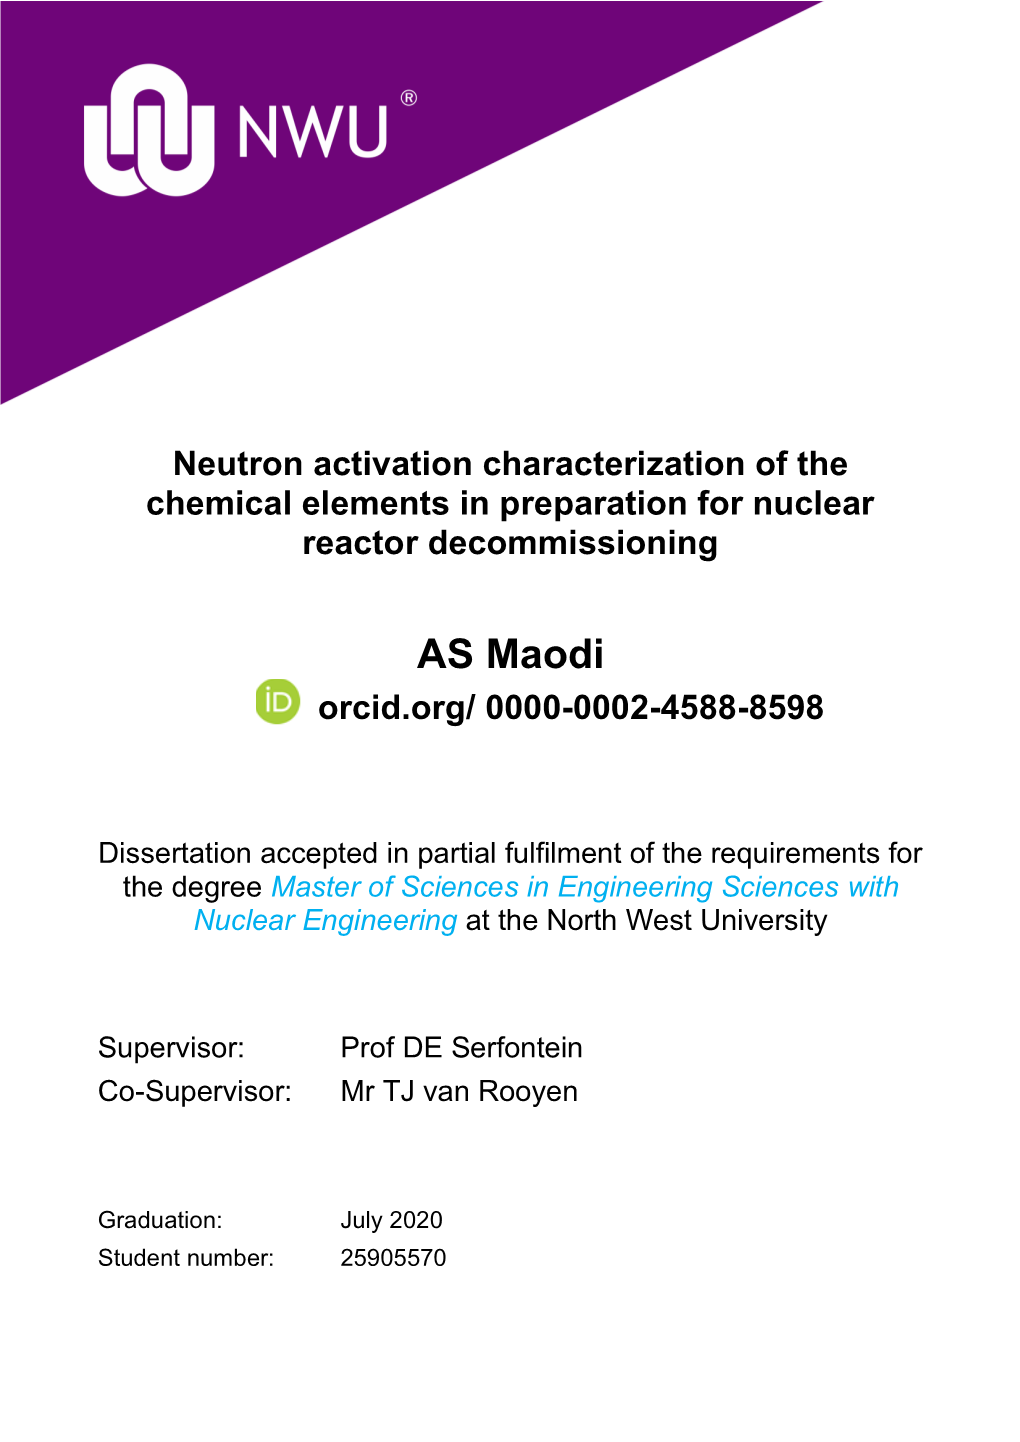 Neutron Activation Characterization of the Chemical Elements in Preparation for Nuclear Reactor Decommissioning